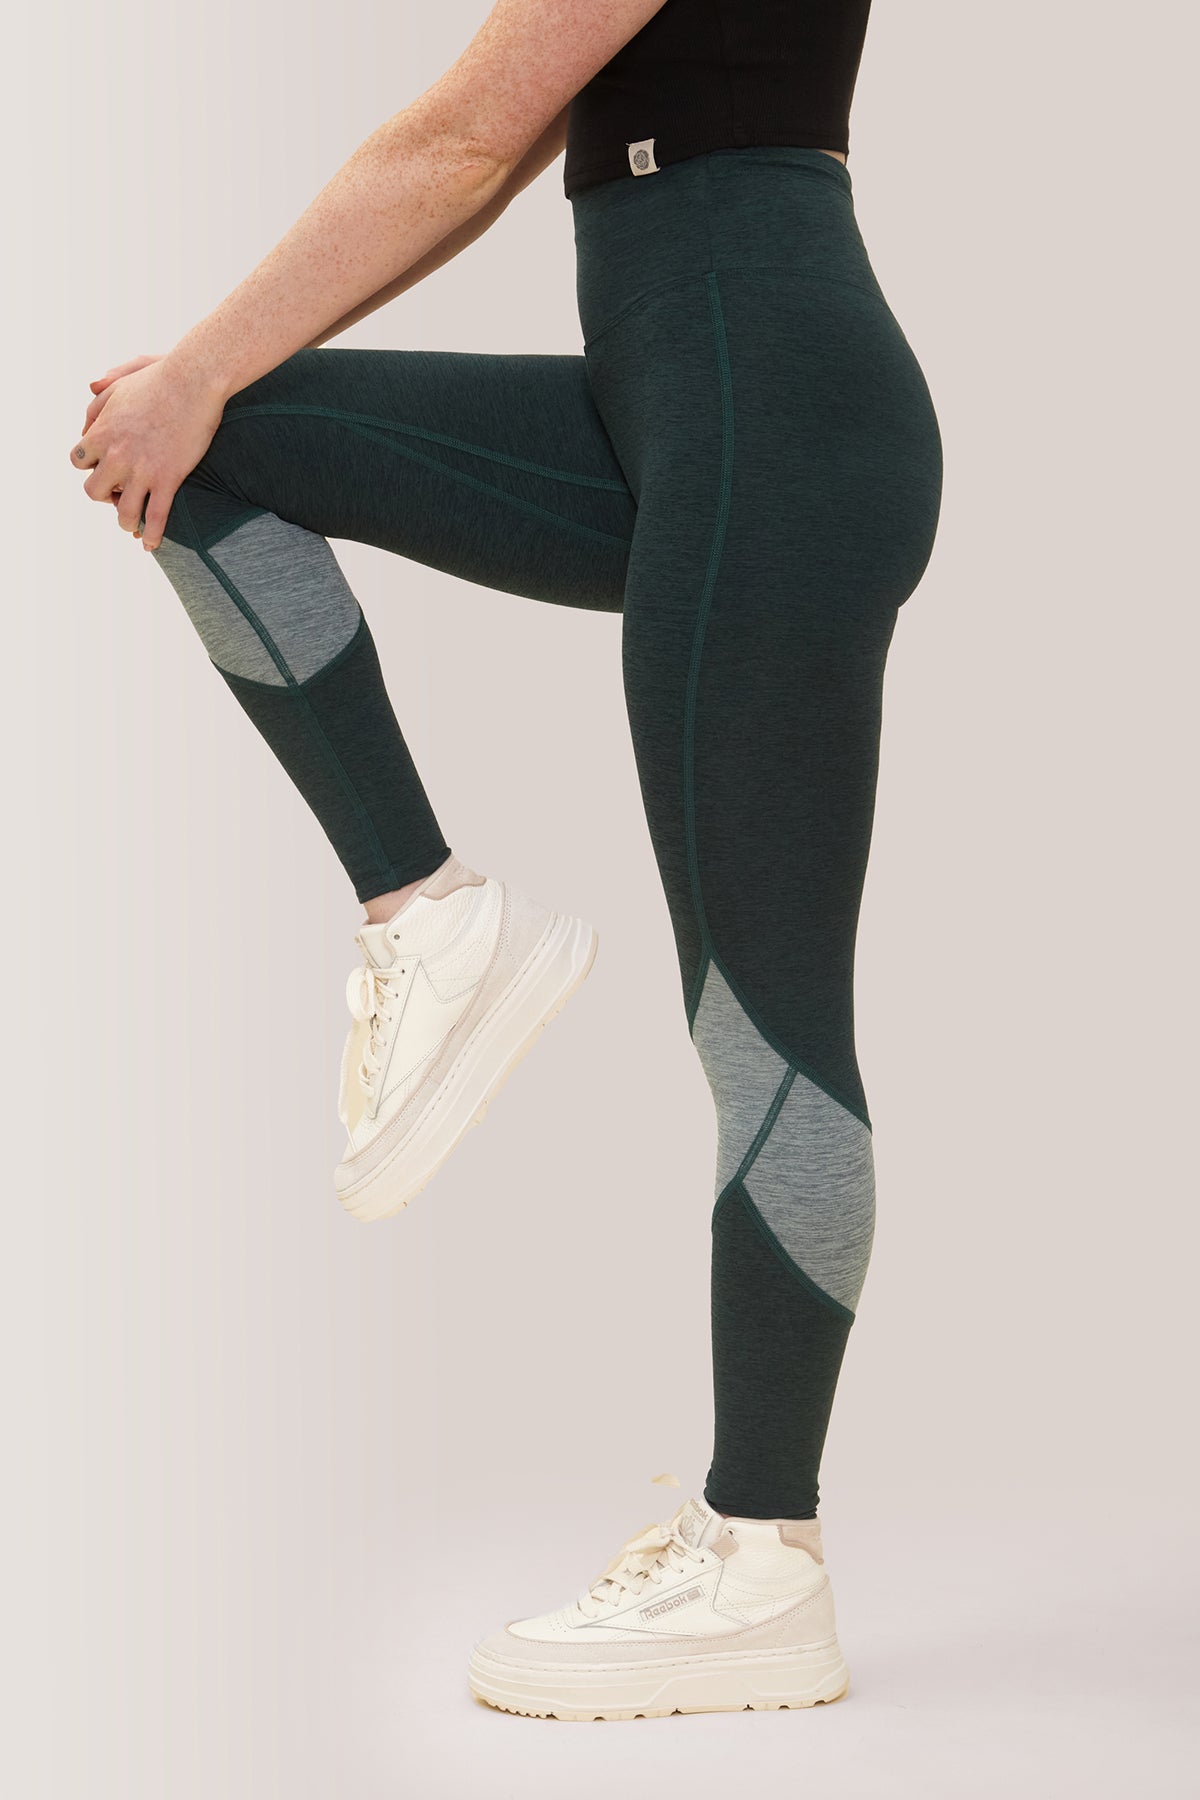 Femme qui porte les leggings Buttery Soft BFF High-Rise Keep Moving de Rose Boreal./ Women wearing the buttery soft BFF high-rise Keep Moving leggings from Rose Boreal. -Fern